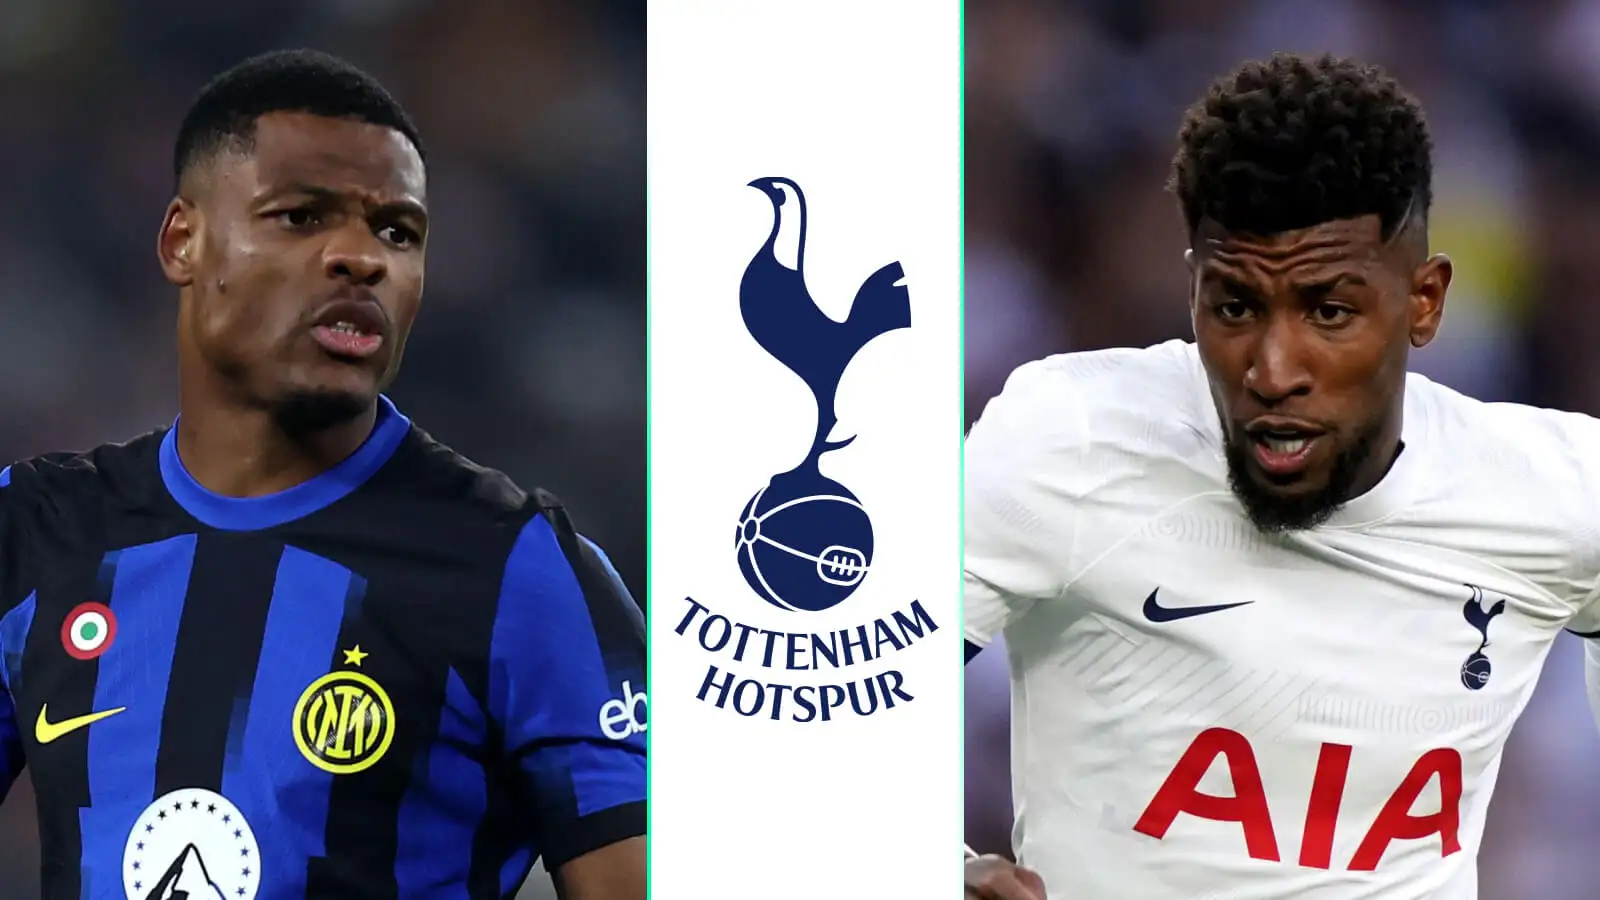 Denzel Dumfries and Emerson Royal either side of the Tottenham badge